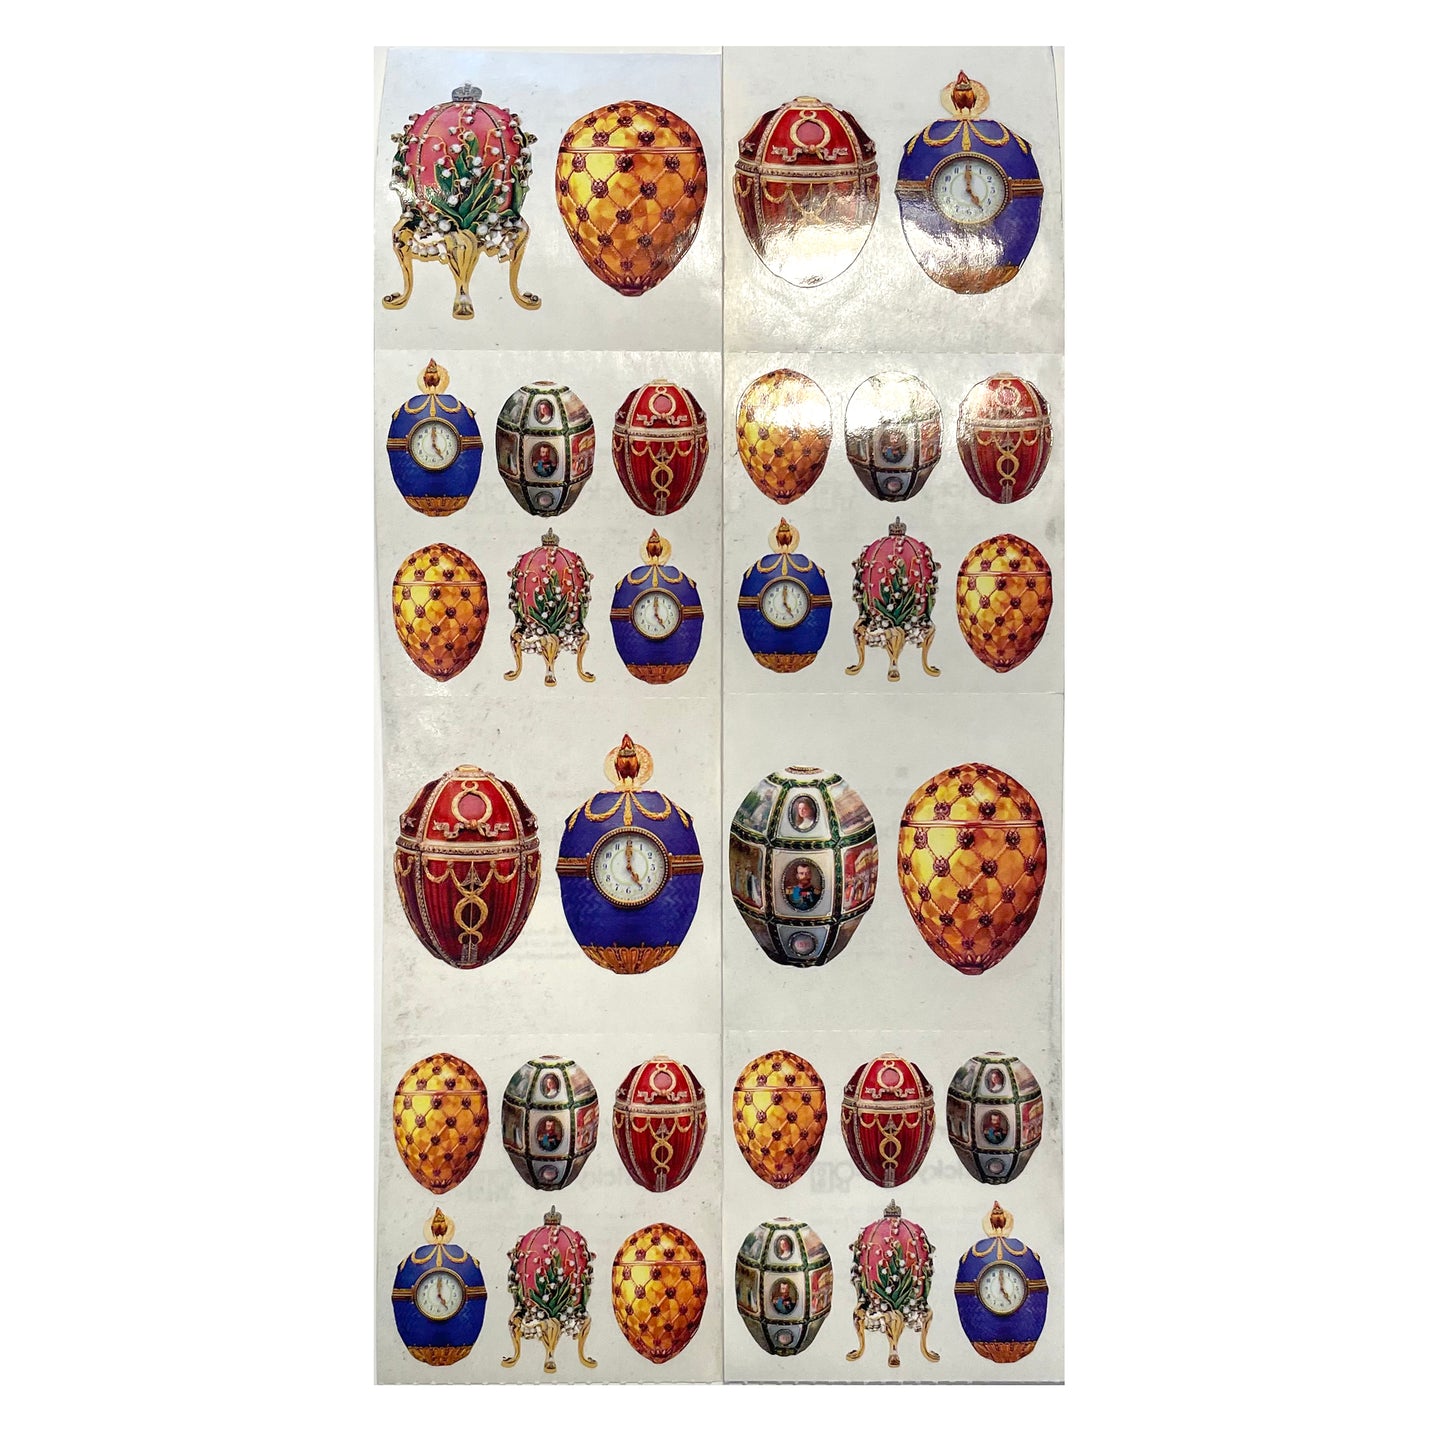 Paper House: Photoreal Cloisonné Metal Painted Eggs stickers